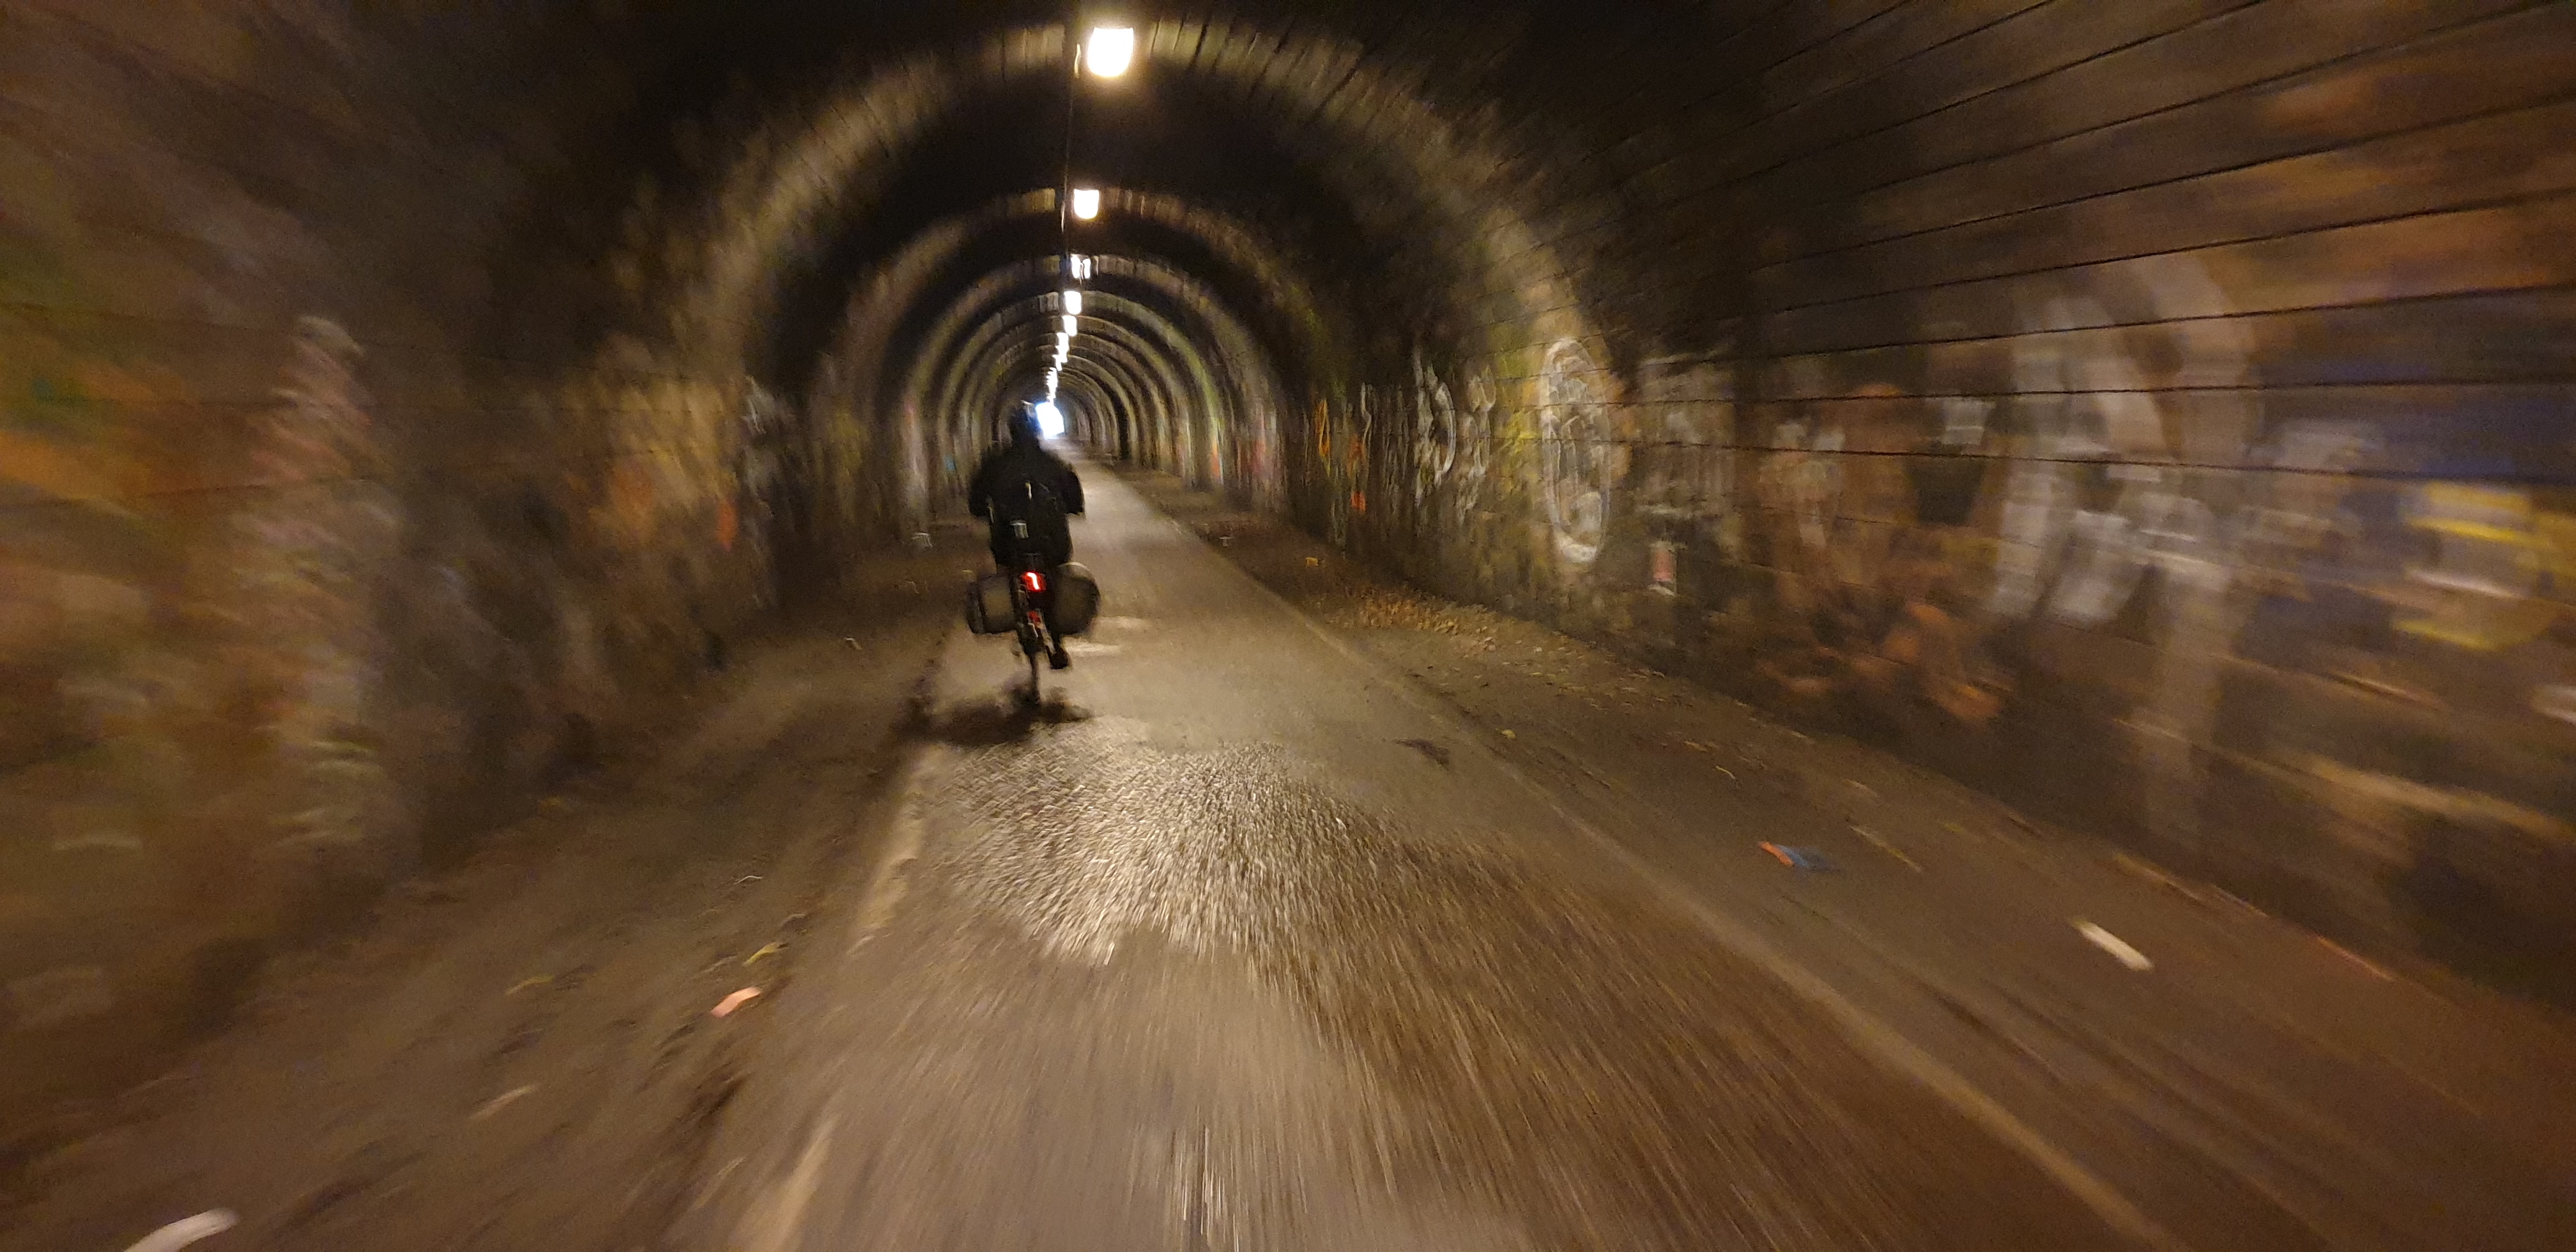 Ruth cycles through the former railway tunnel of The Innocent Railway.